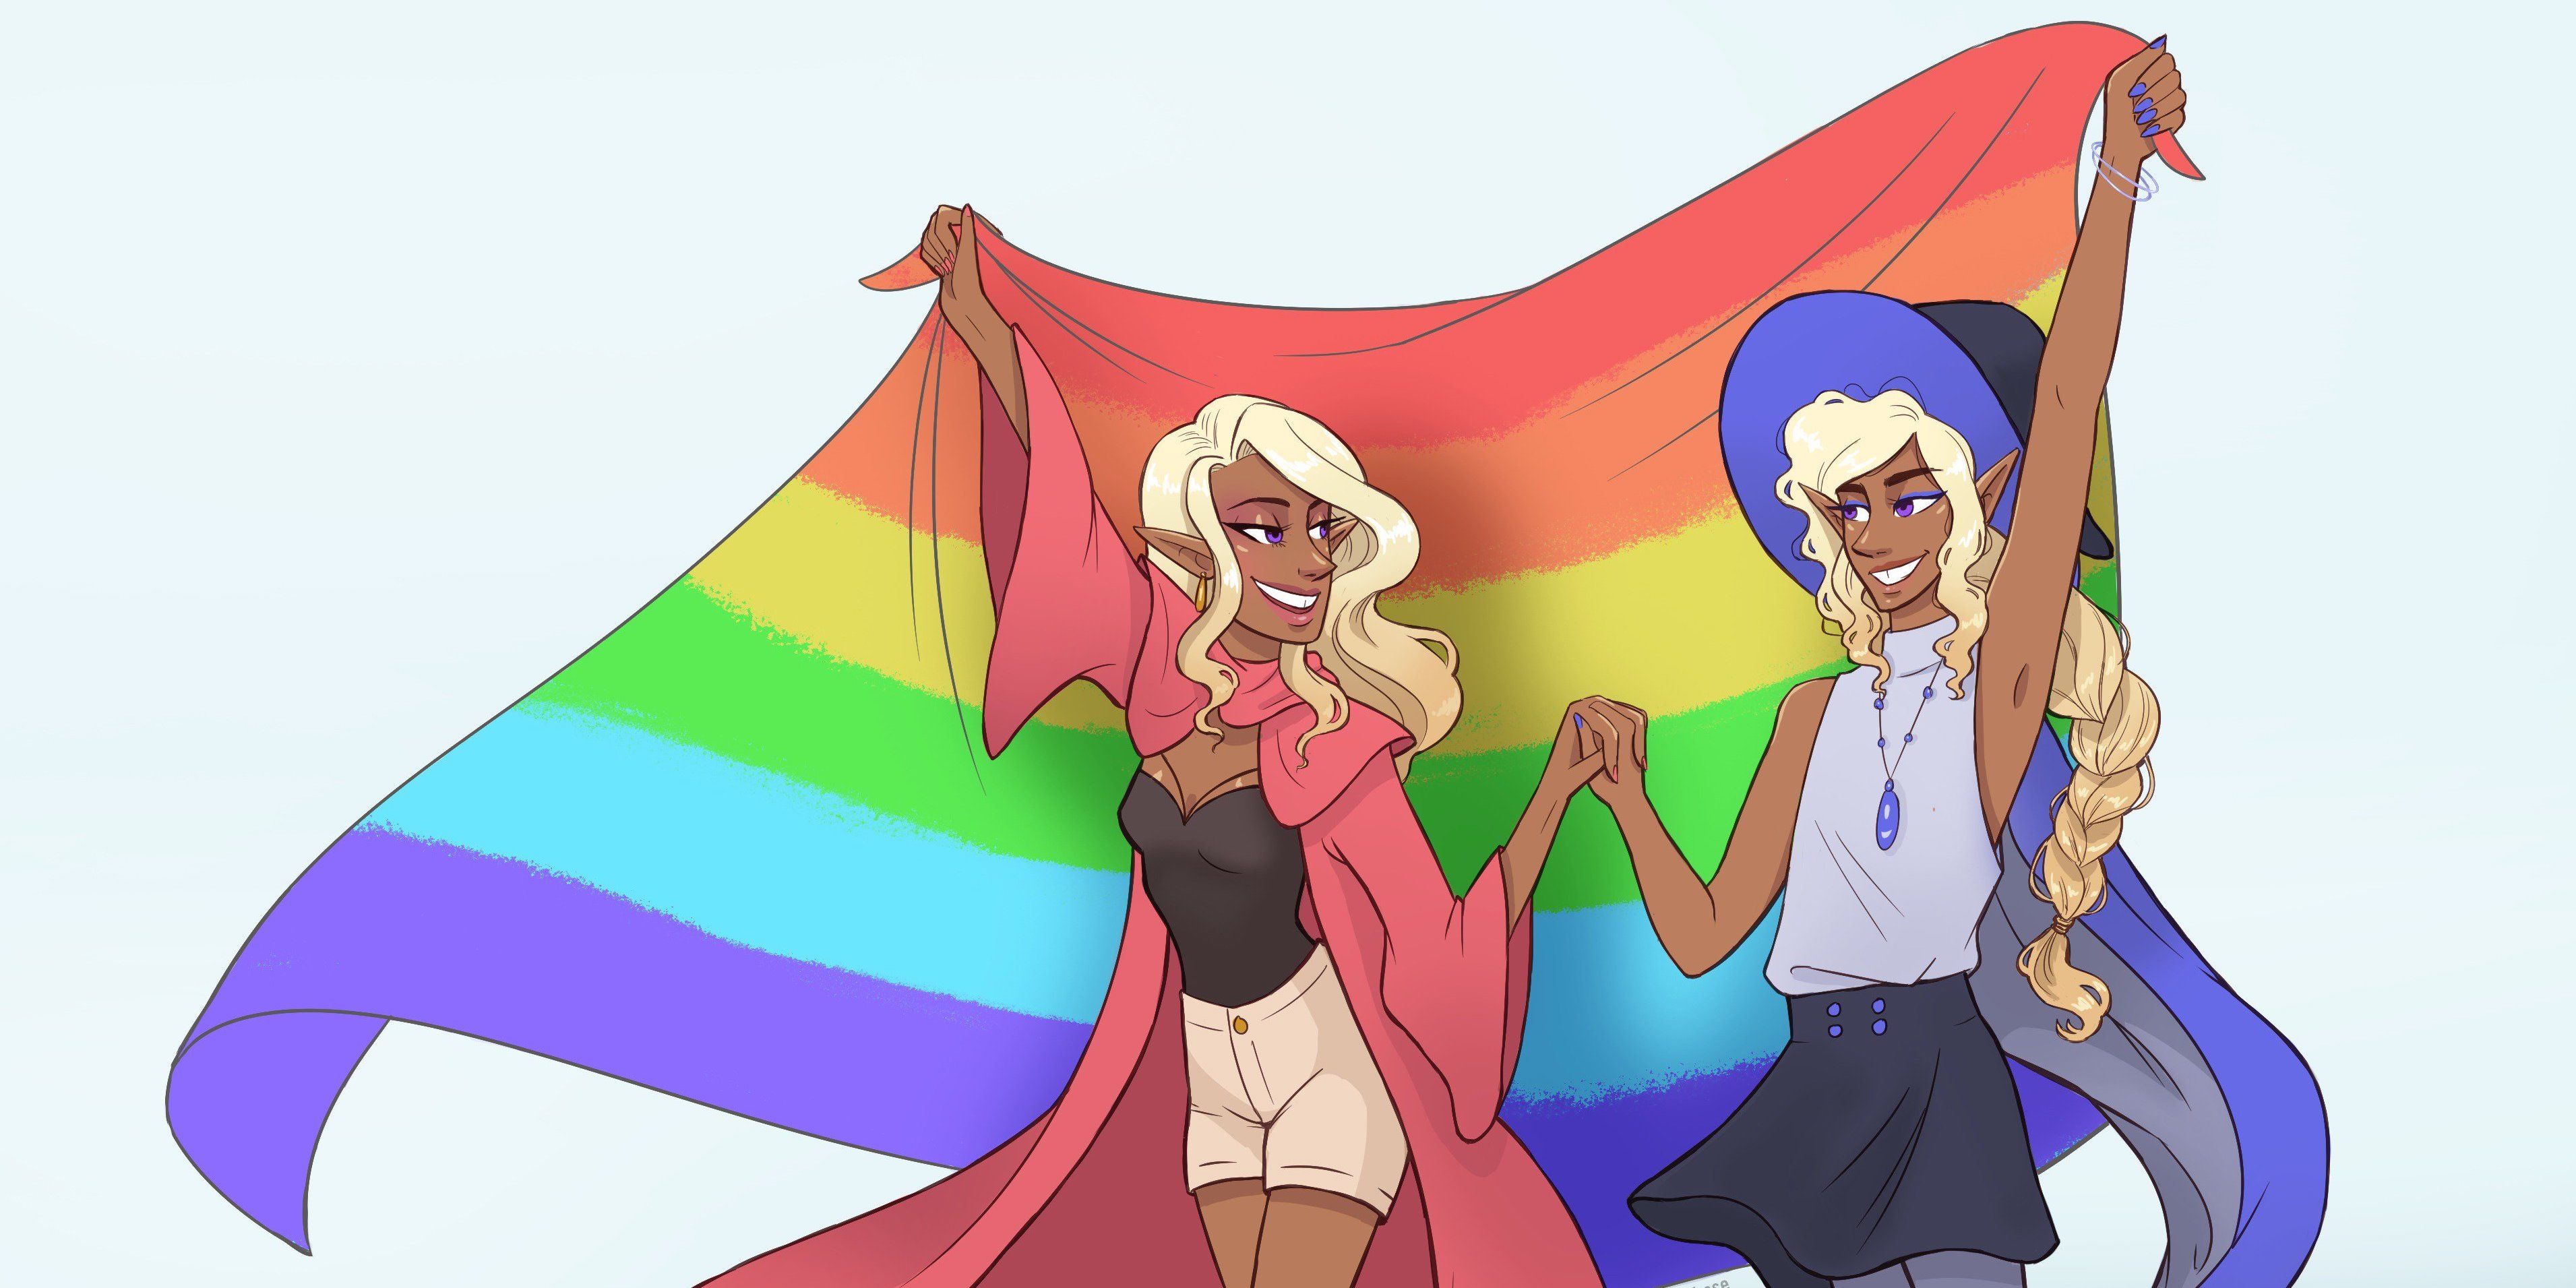 Taako and Lup from The Adventure Zone holding a pride flag.